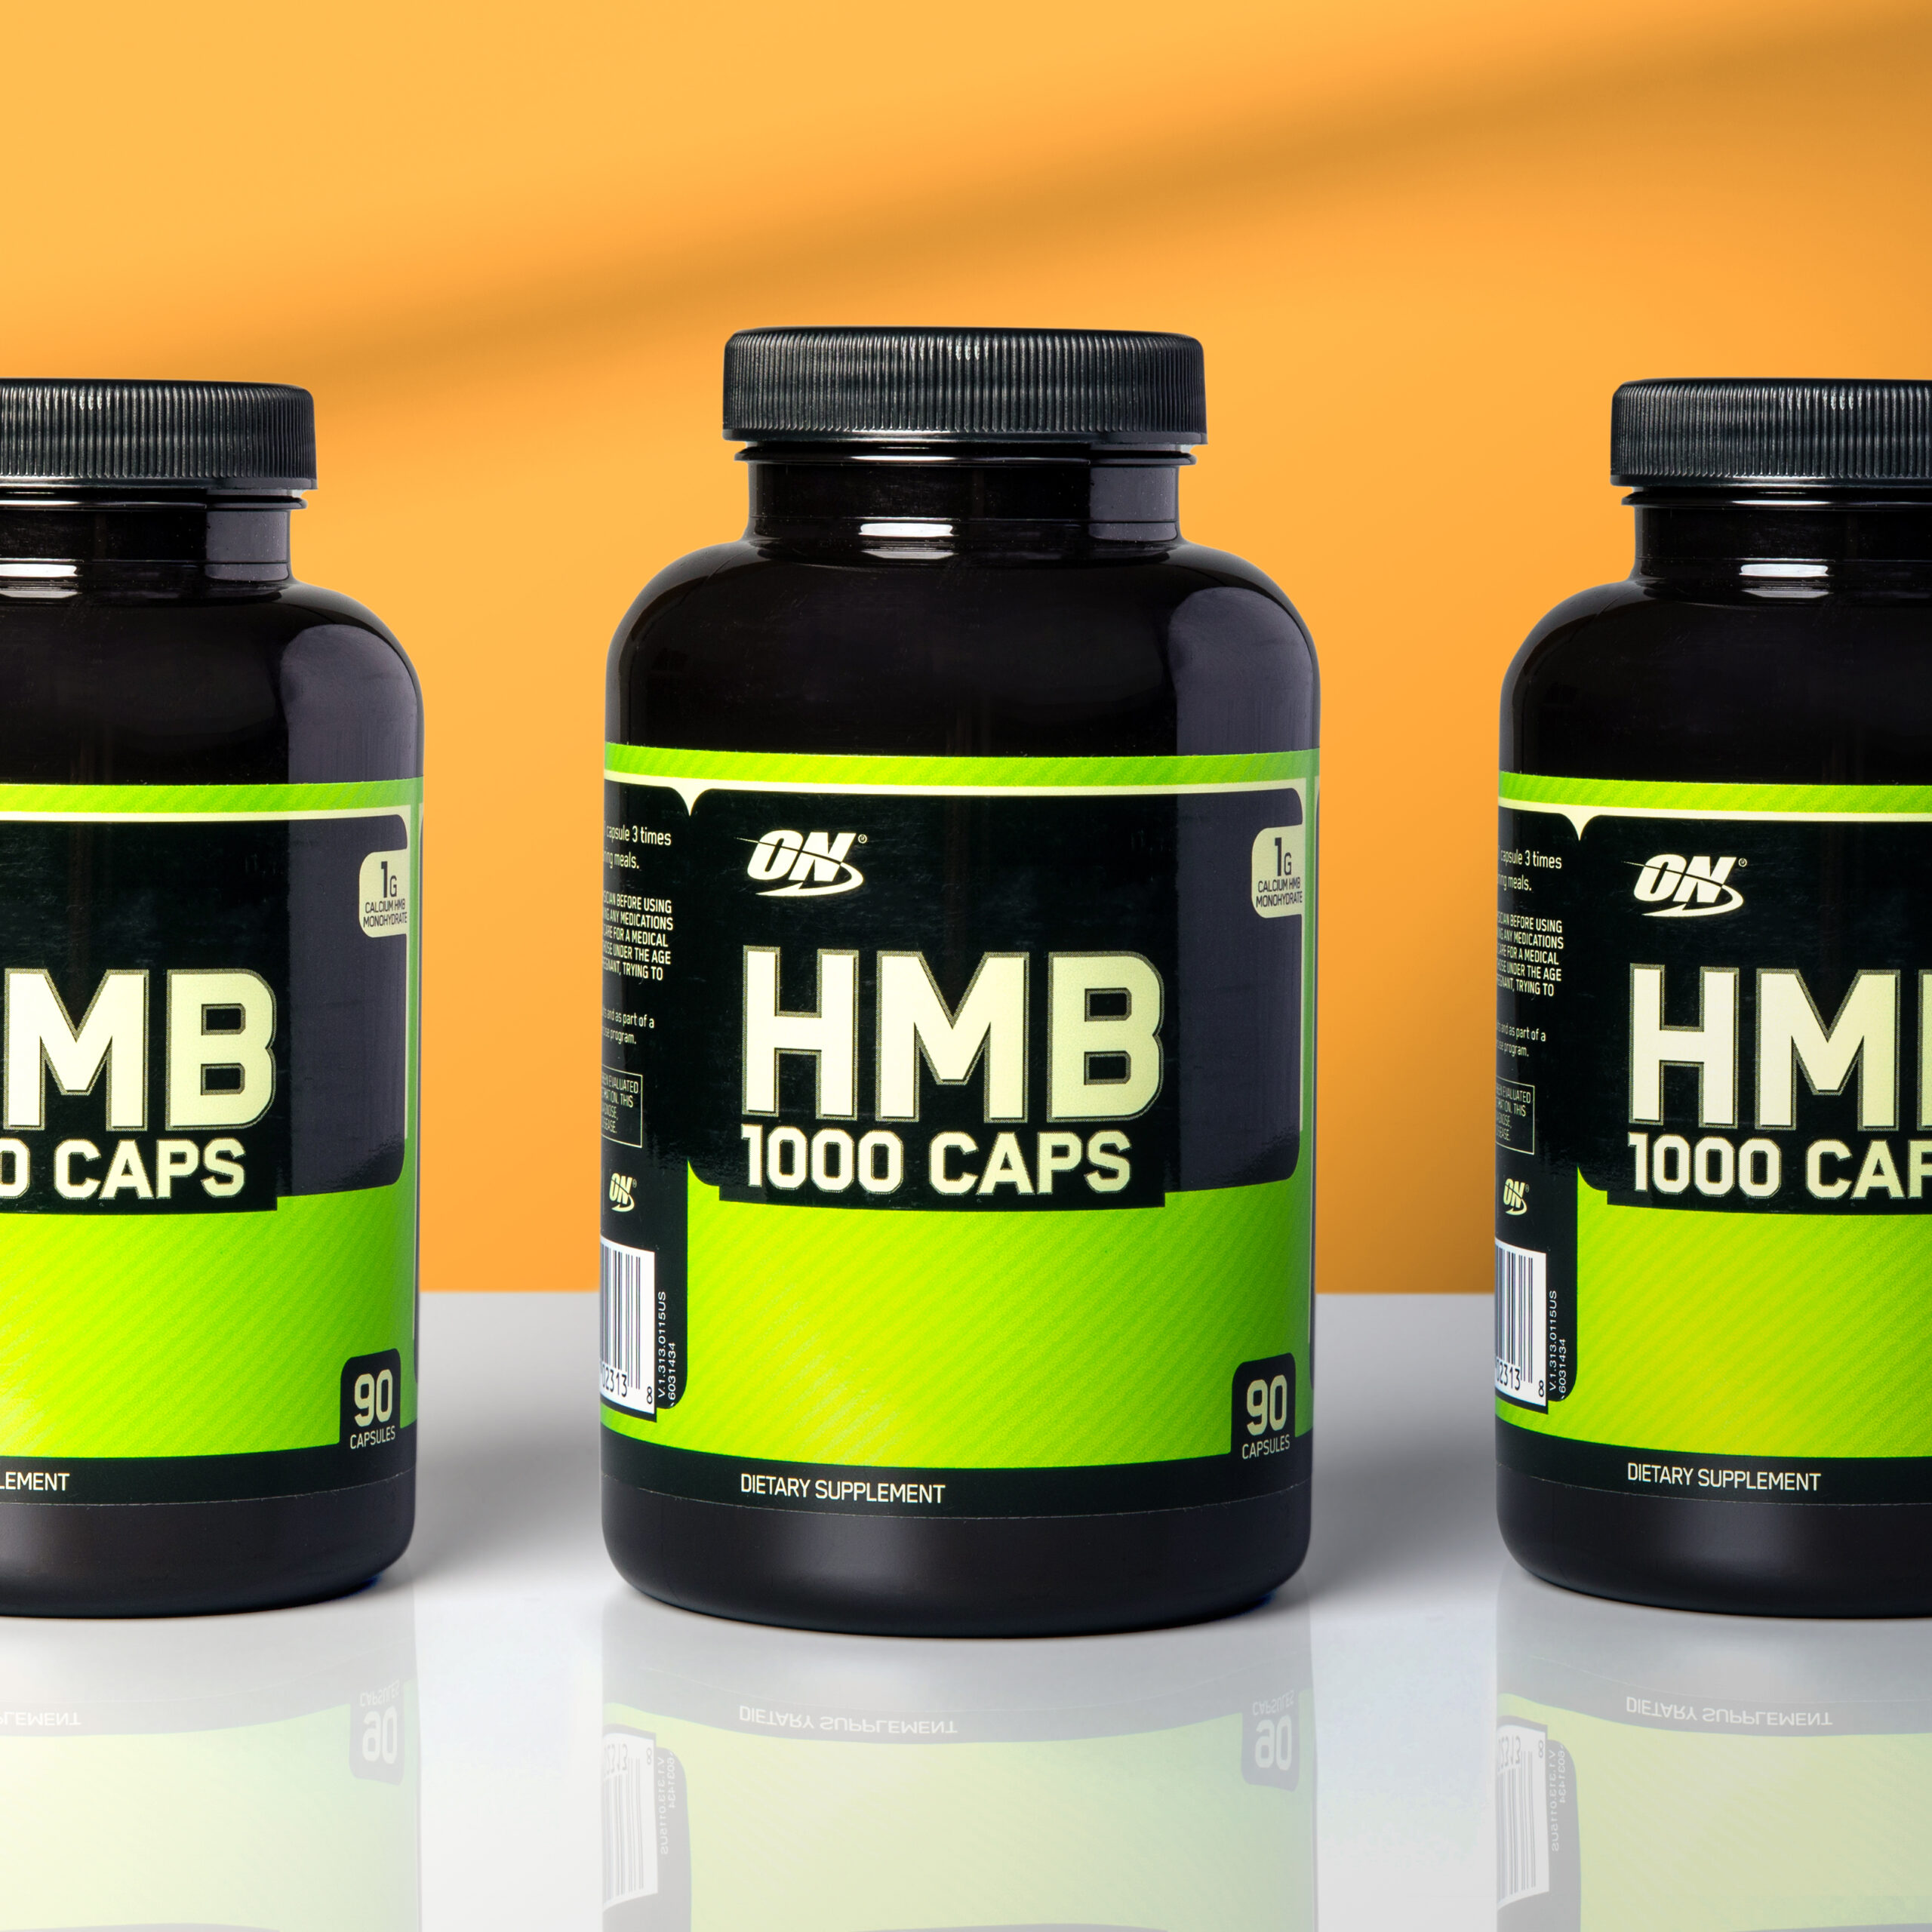 Supplement product Optimum Nutrition HMB 1000 Caps featuring the clinically proven muscle health ingredient myHMB